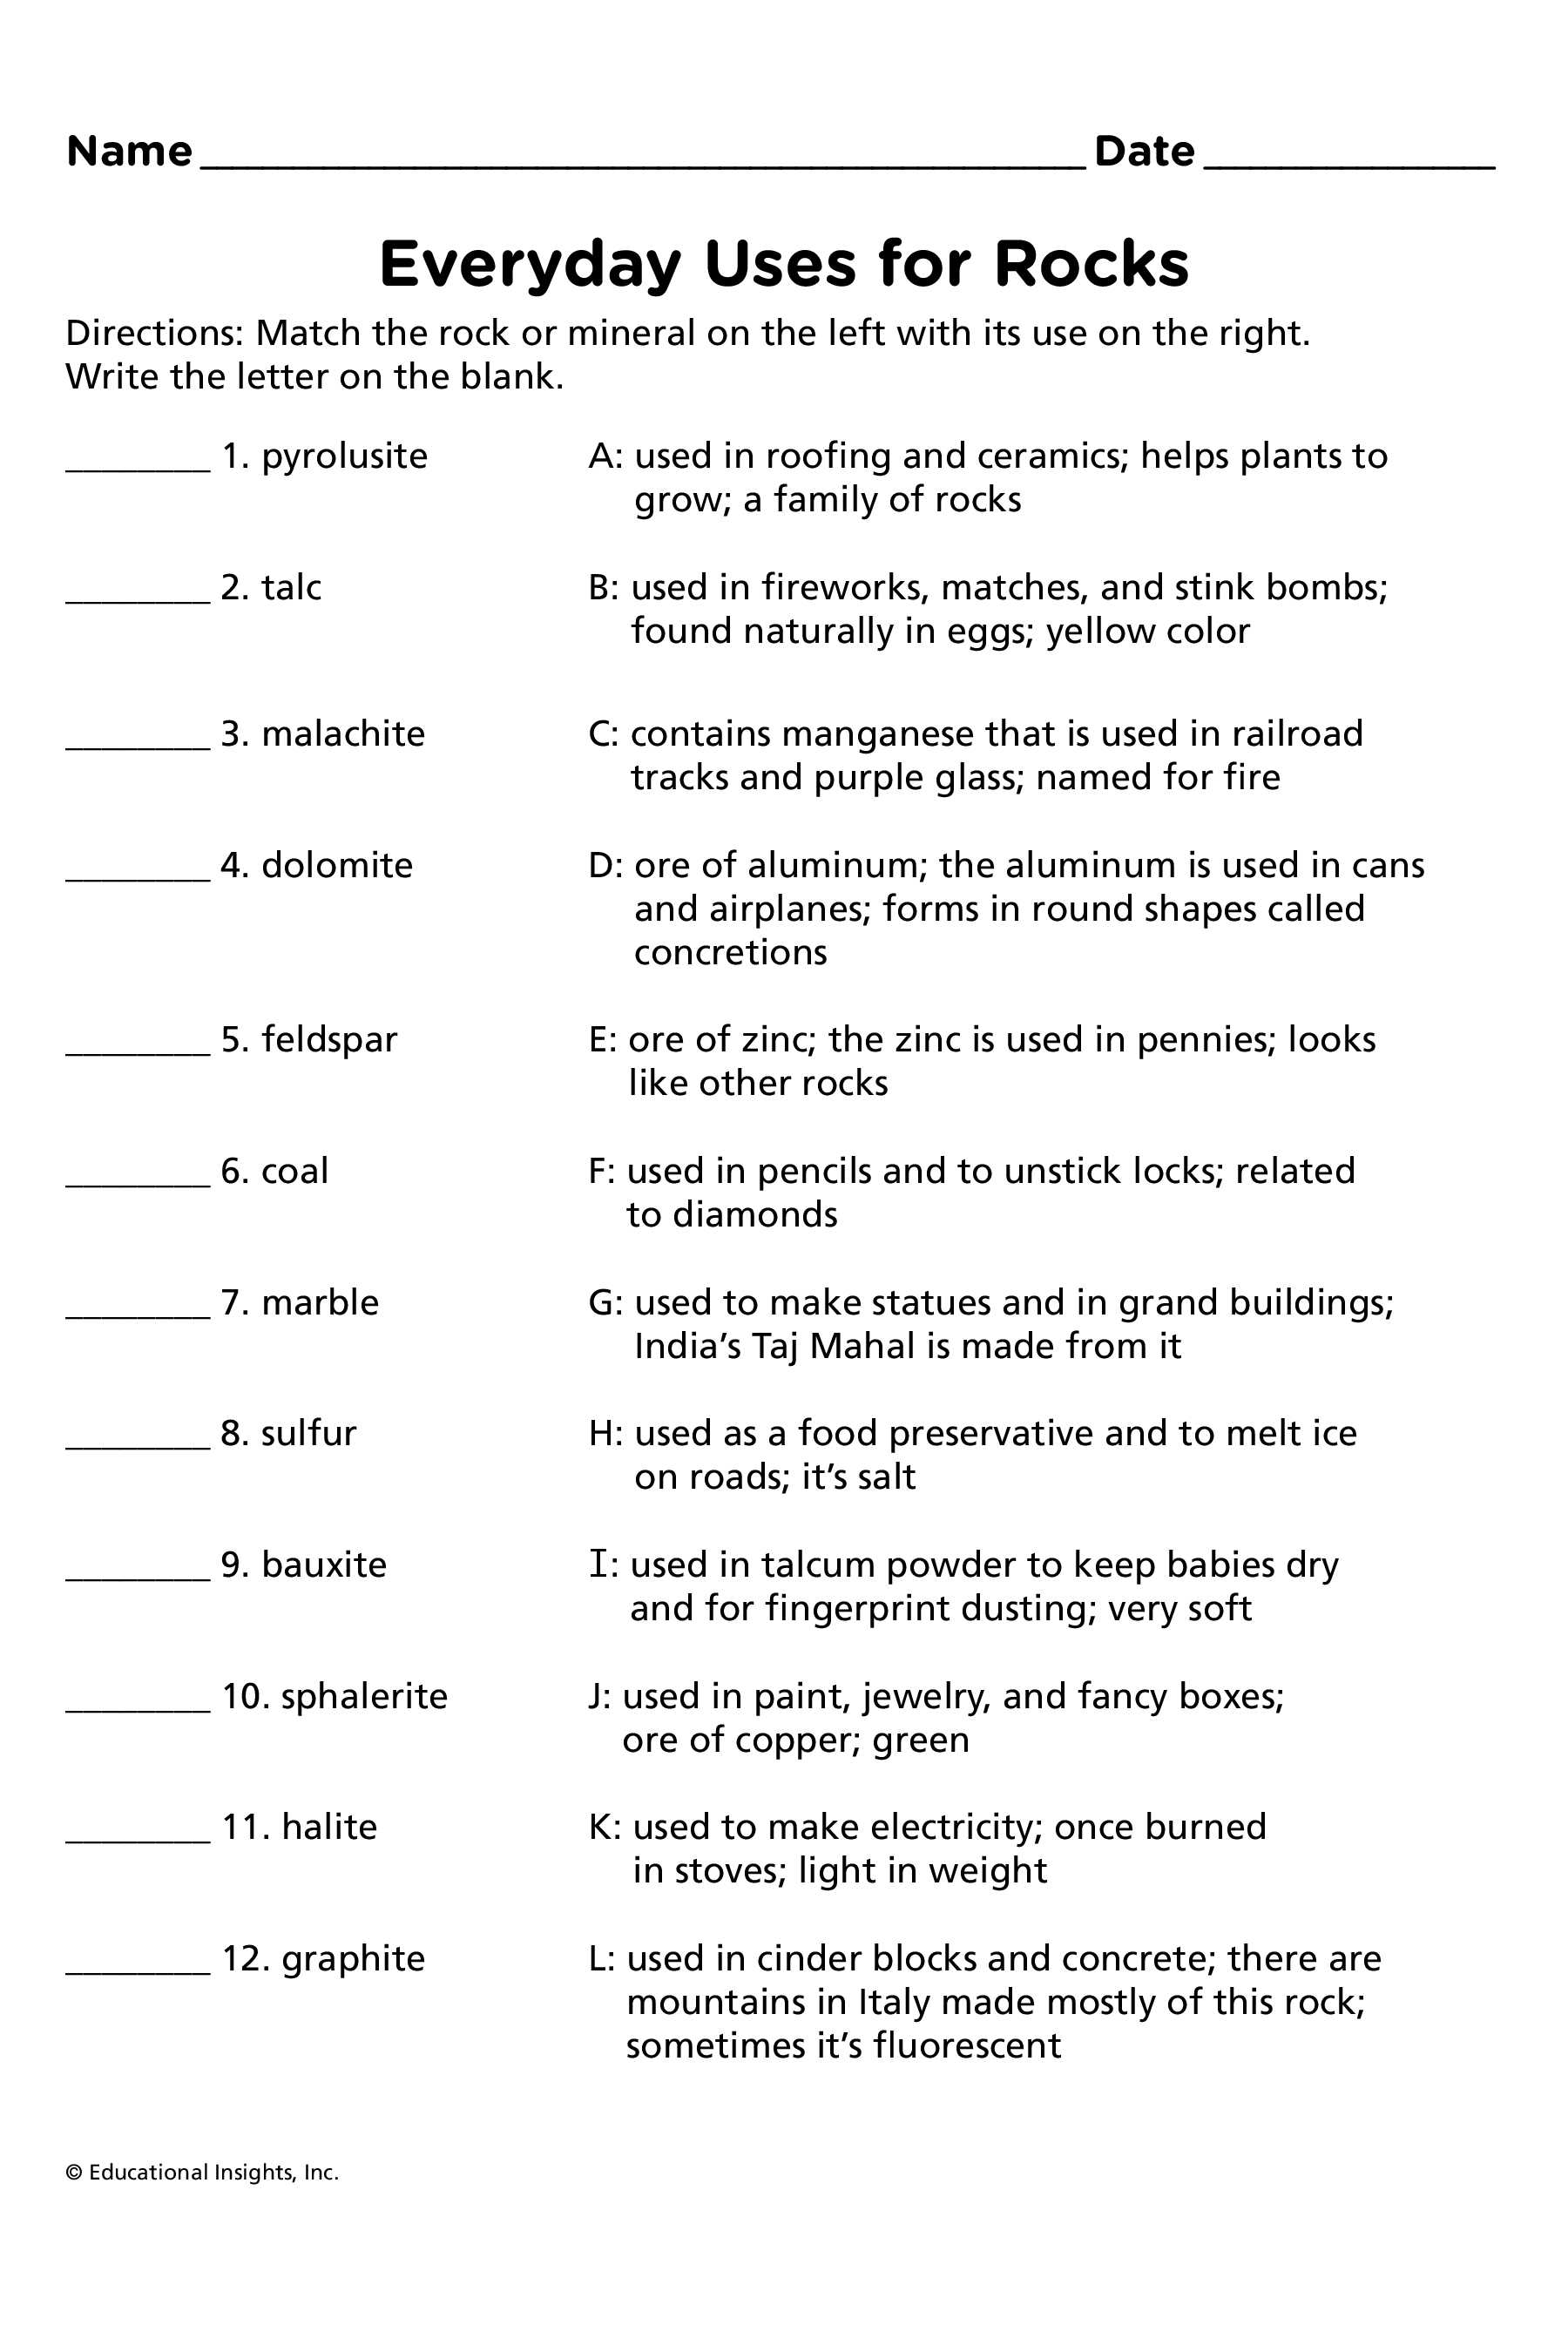 Music History Worksheets Along with Education Worksheets Answers Beautiful Conjunction Examples for